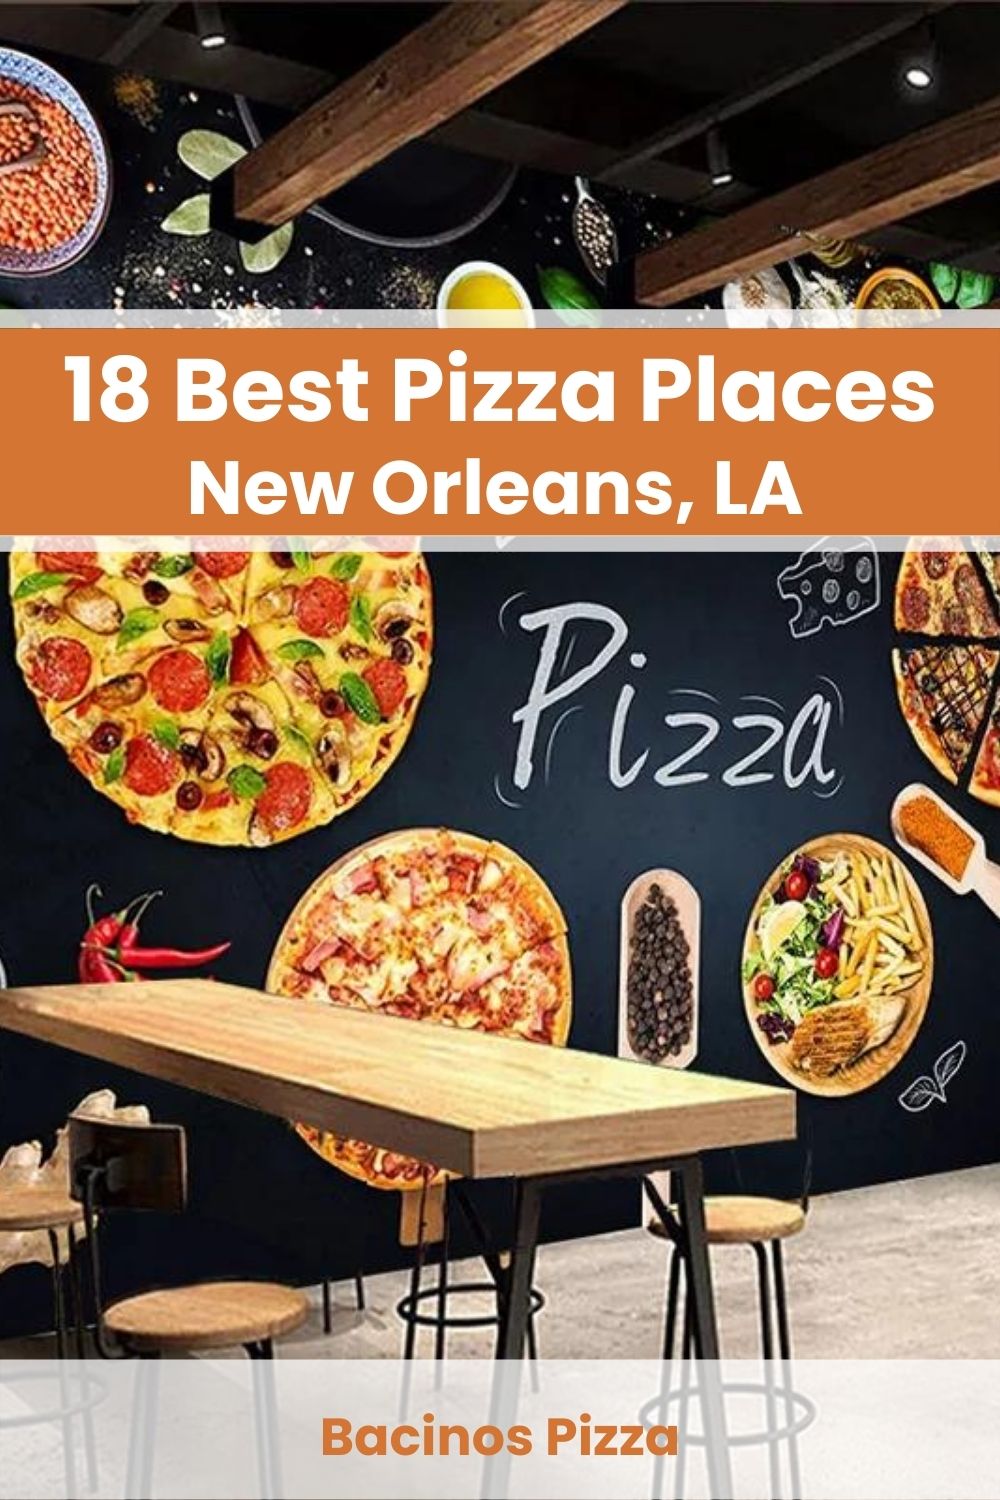 Best Pizza Places in New Orleans